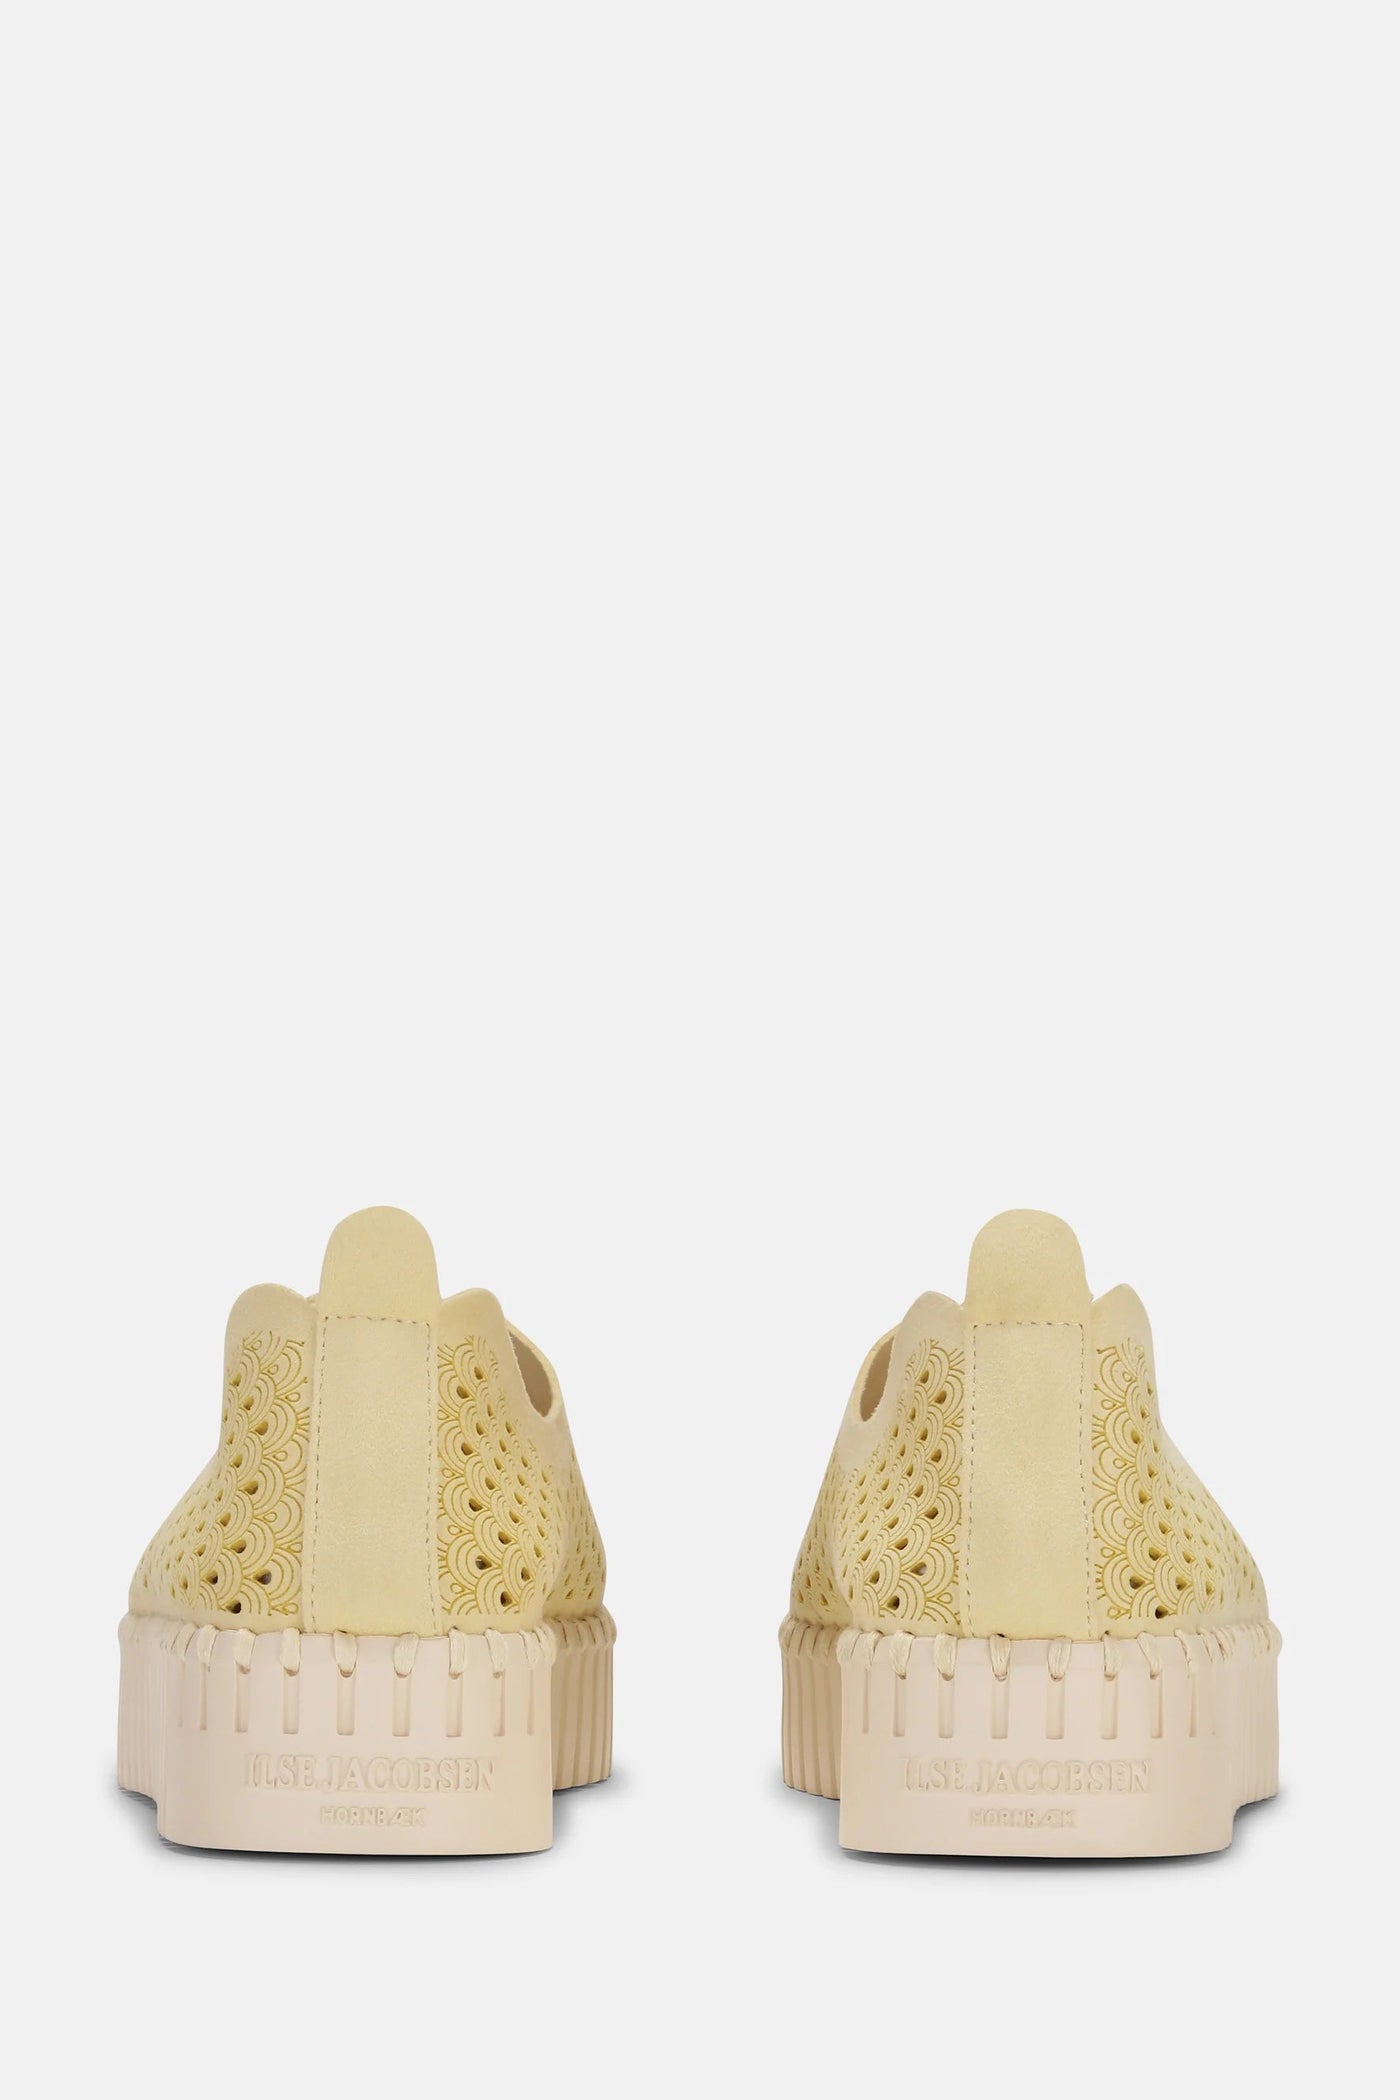 Ilse Jacobsen Platform Tulip Shoes in Double Cream-Womens-Ohh! By Gum - Shop Sustainable